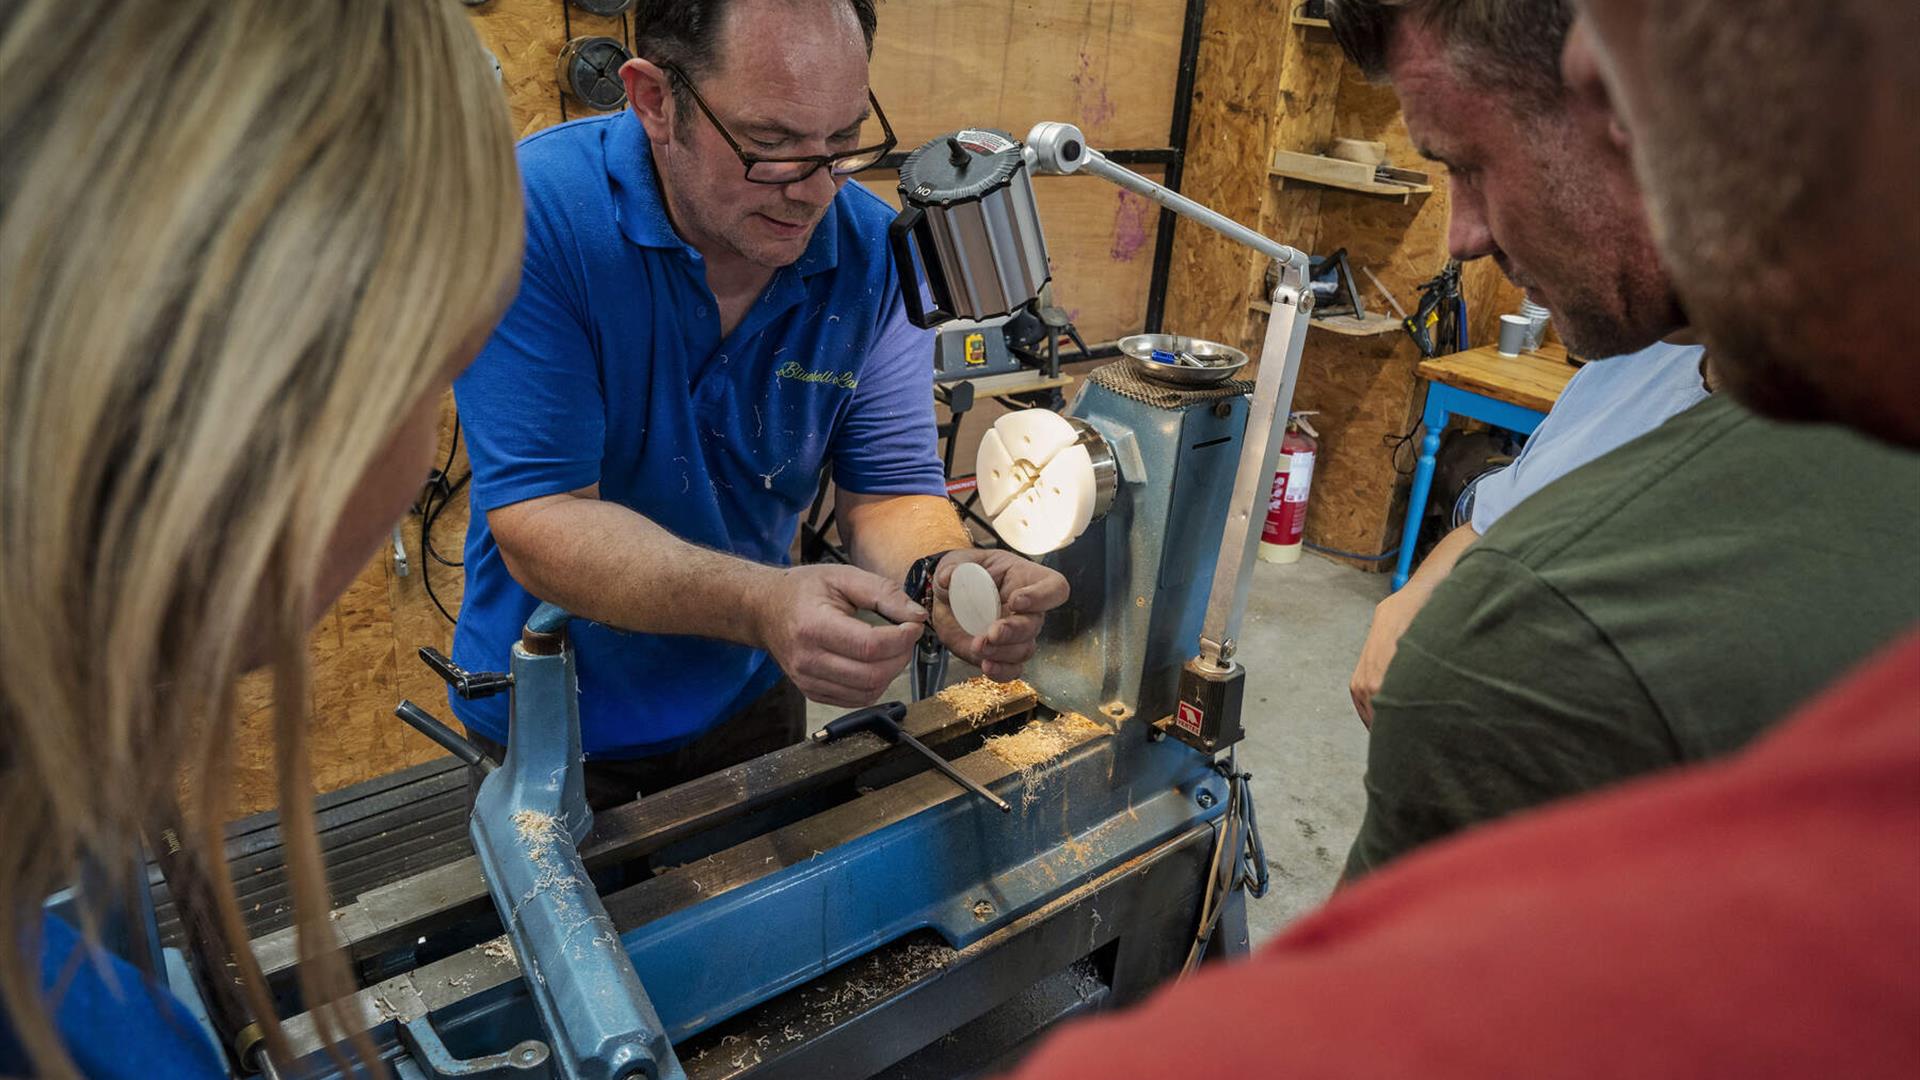 Padraig Carragher talks a group through the wood turning experience